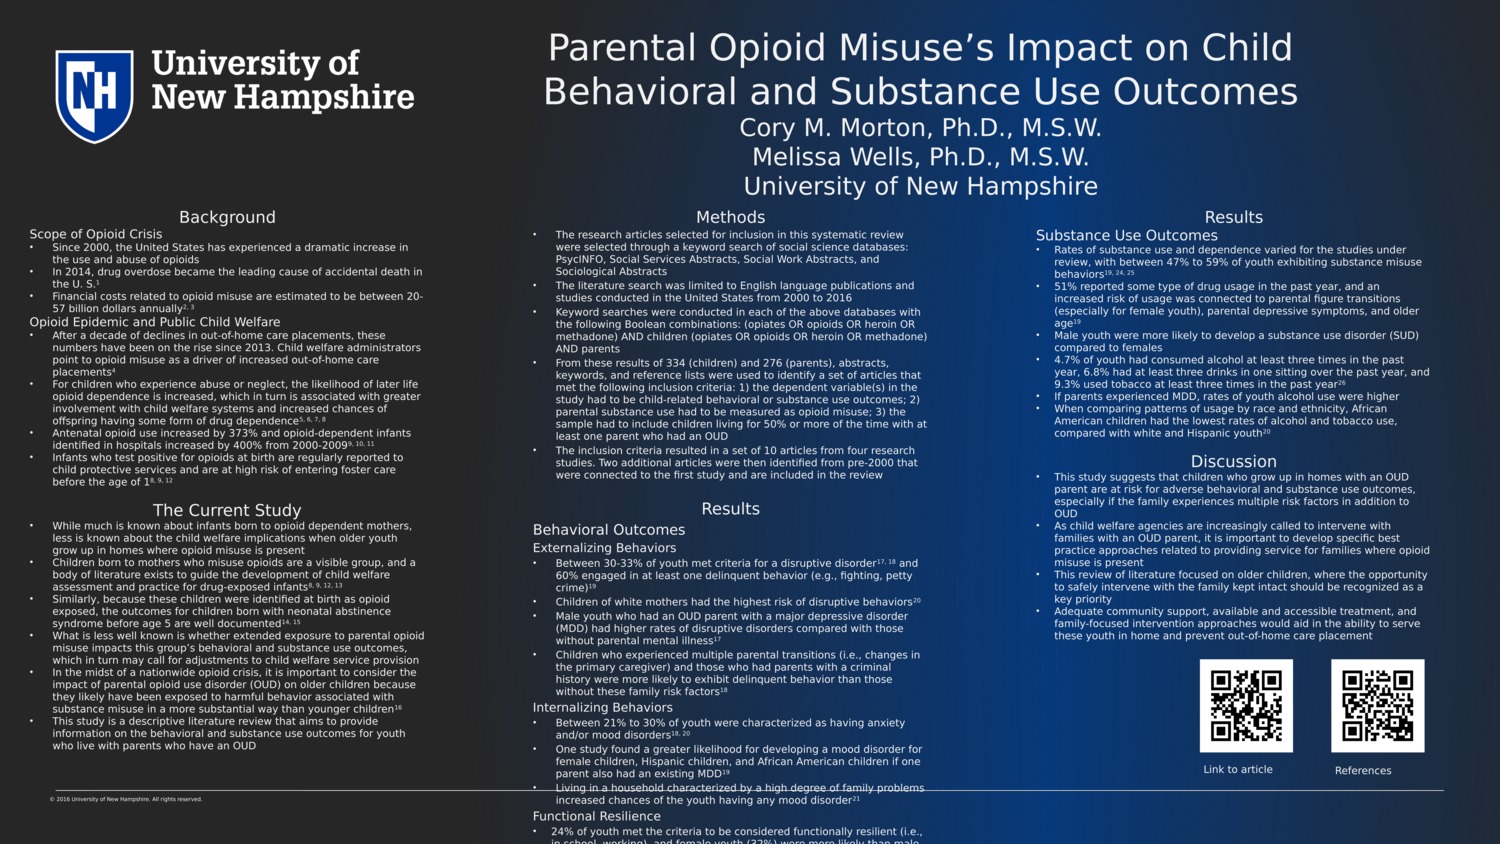 Parental Opioid Misuse’S Impact On Child Behavioral And Substance Use Outcomes by cmm1061